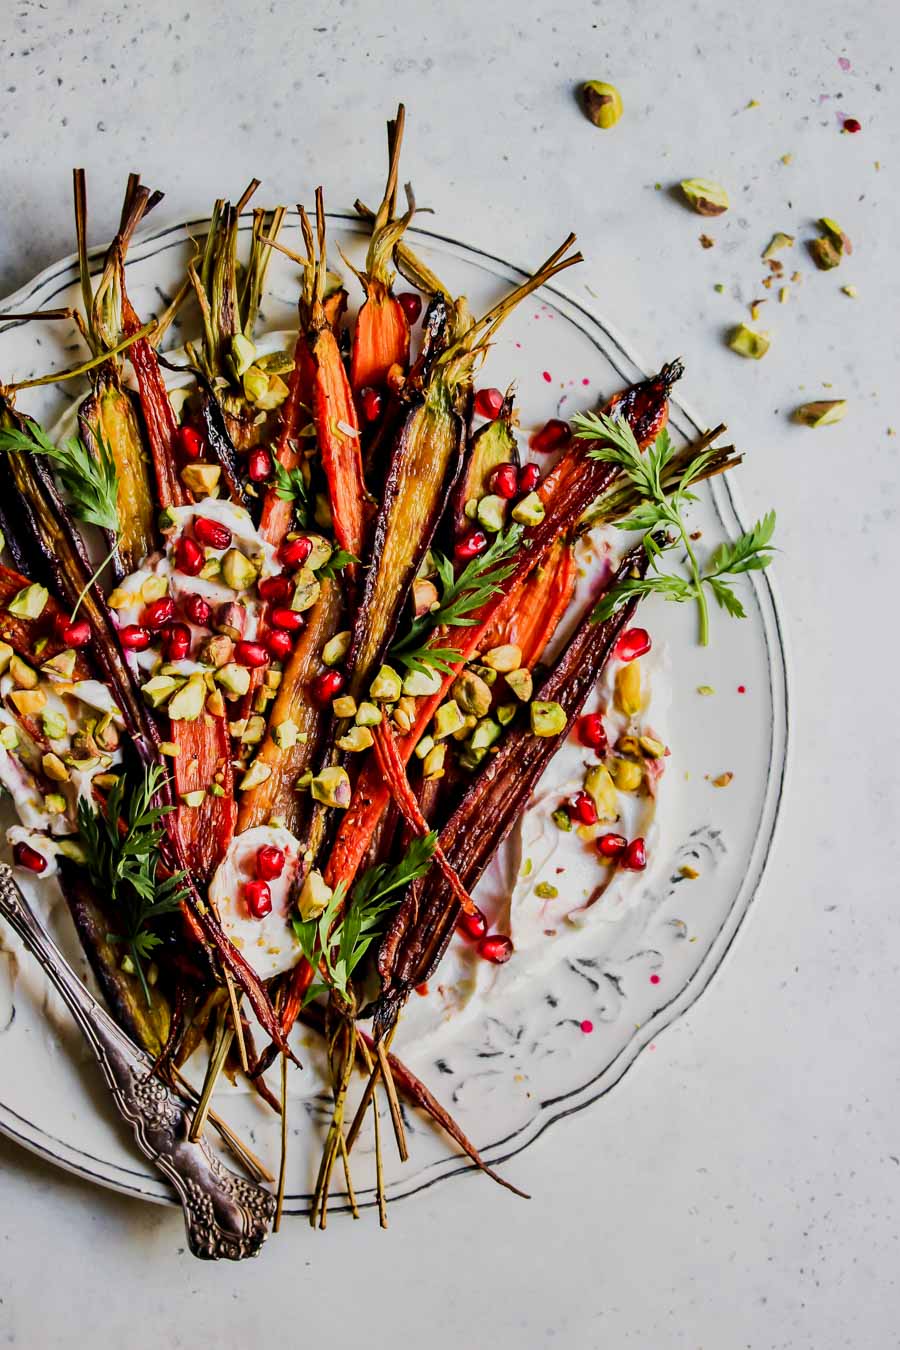 5-Ingredient Pomegranate-Glazed Carrots with Whipped Goat Cheese